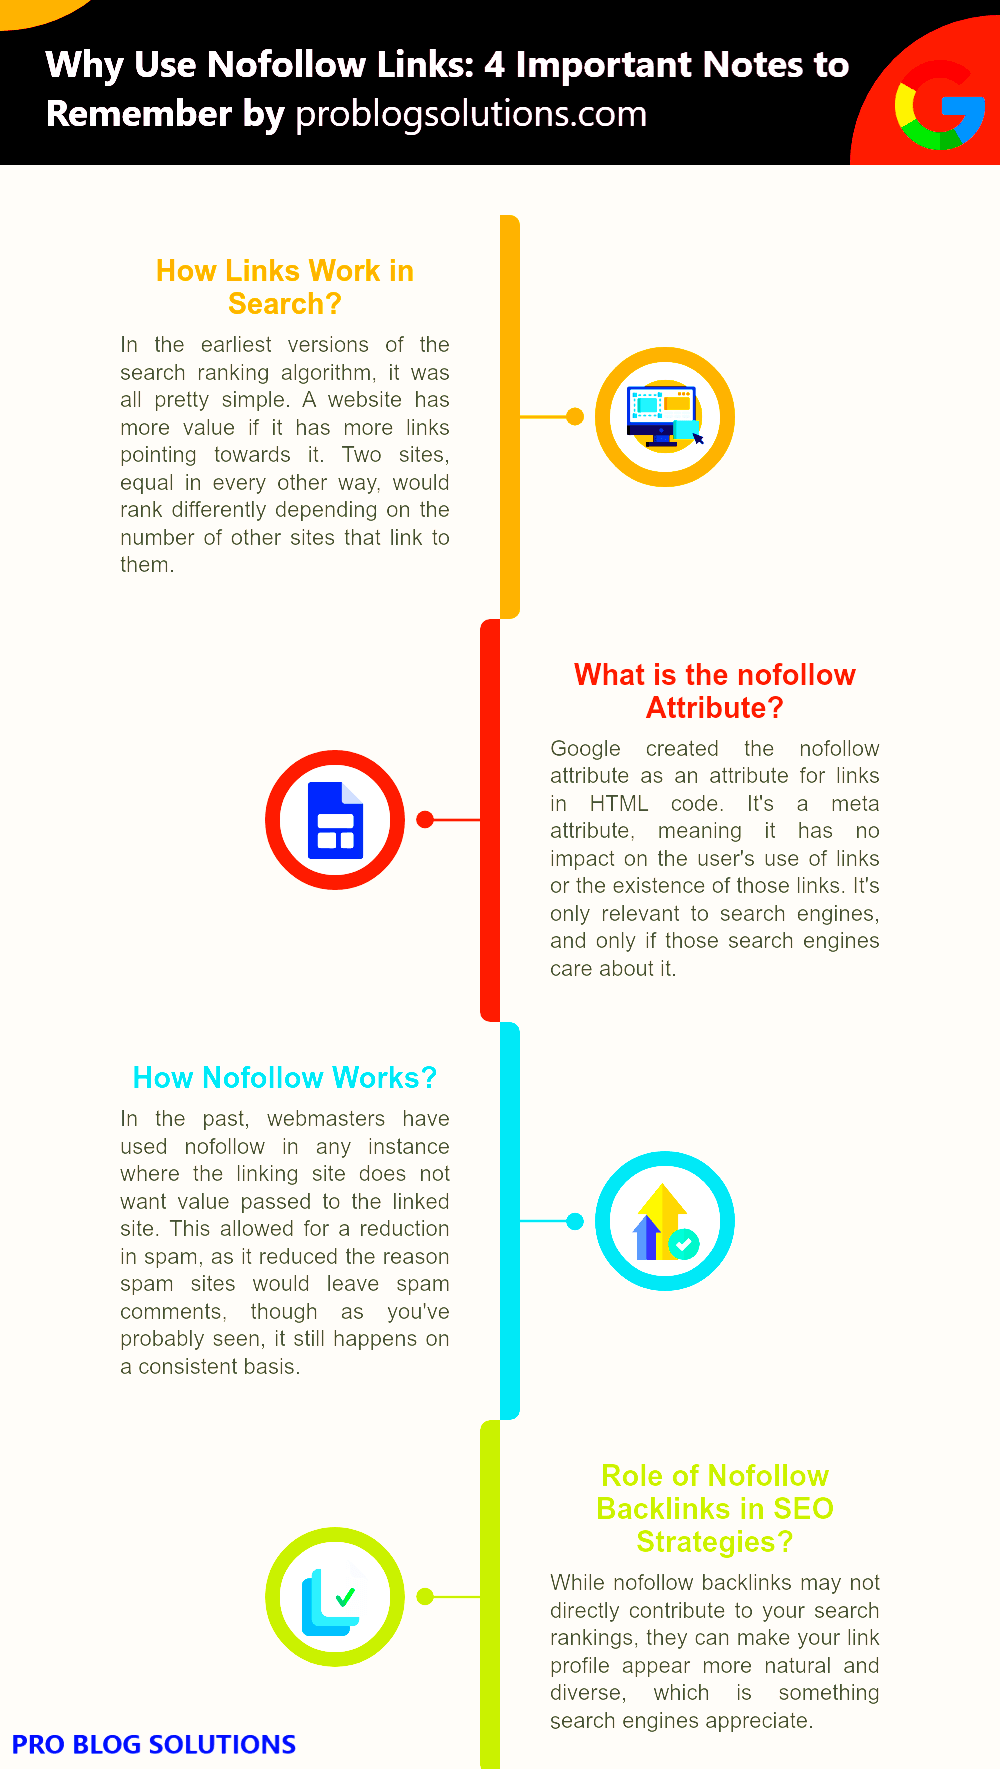 Infographic - Why Use Nofollow Links?